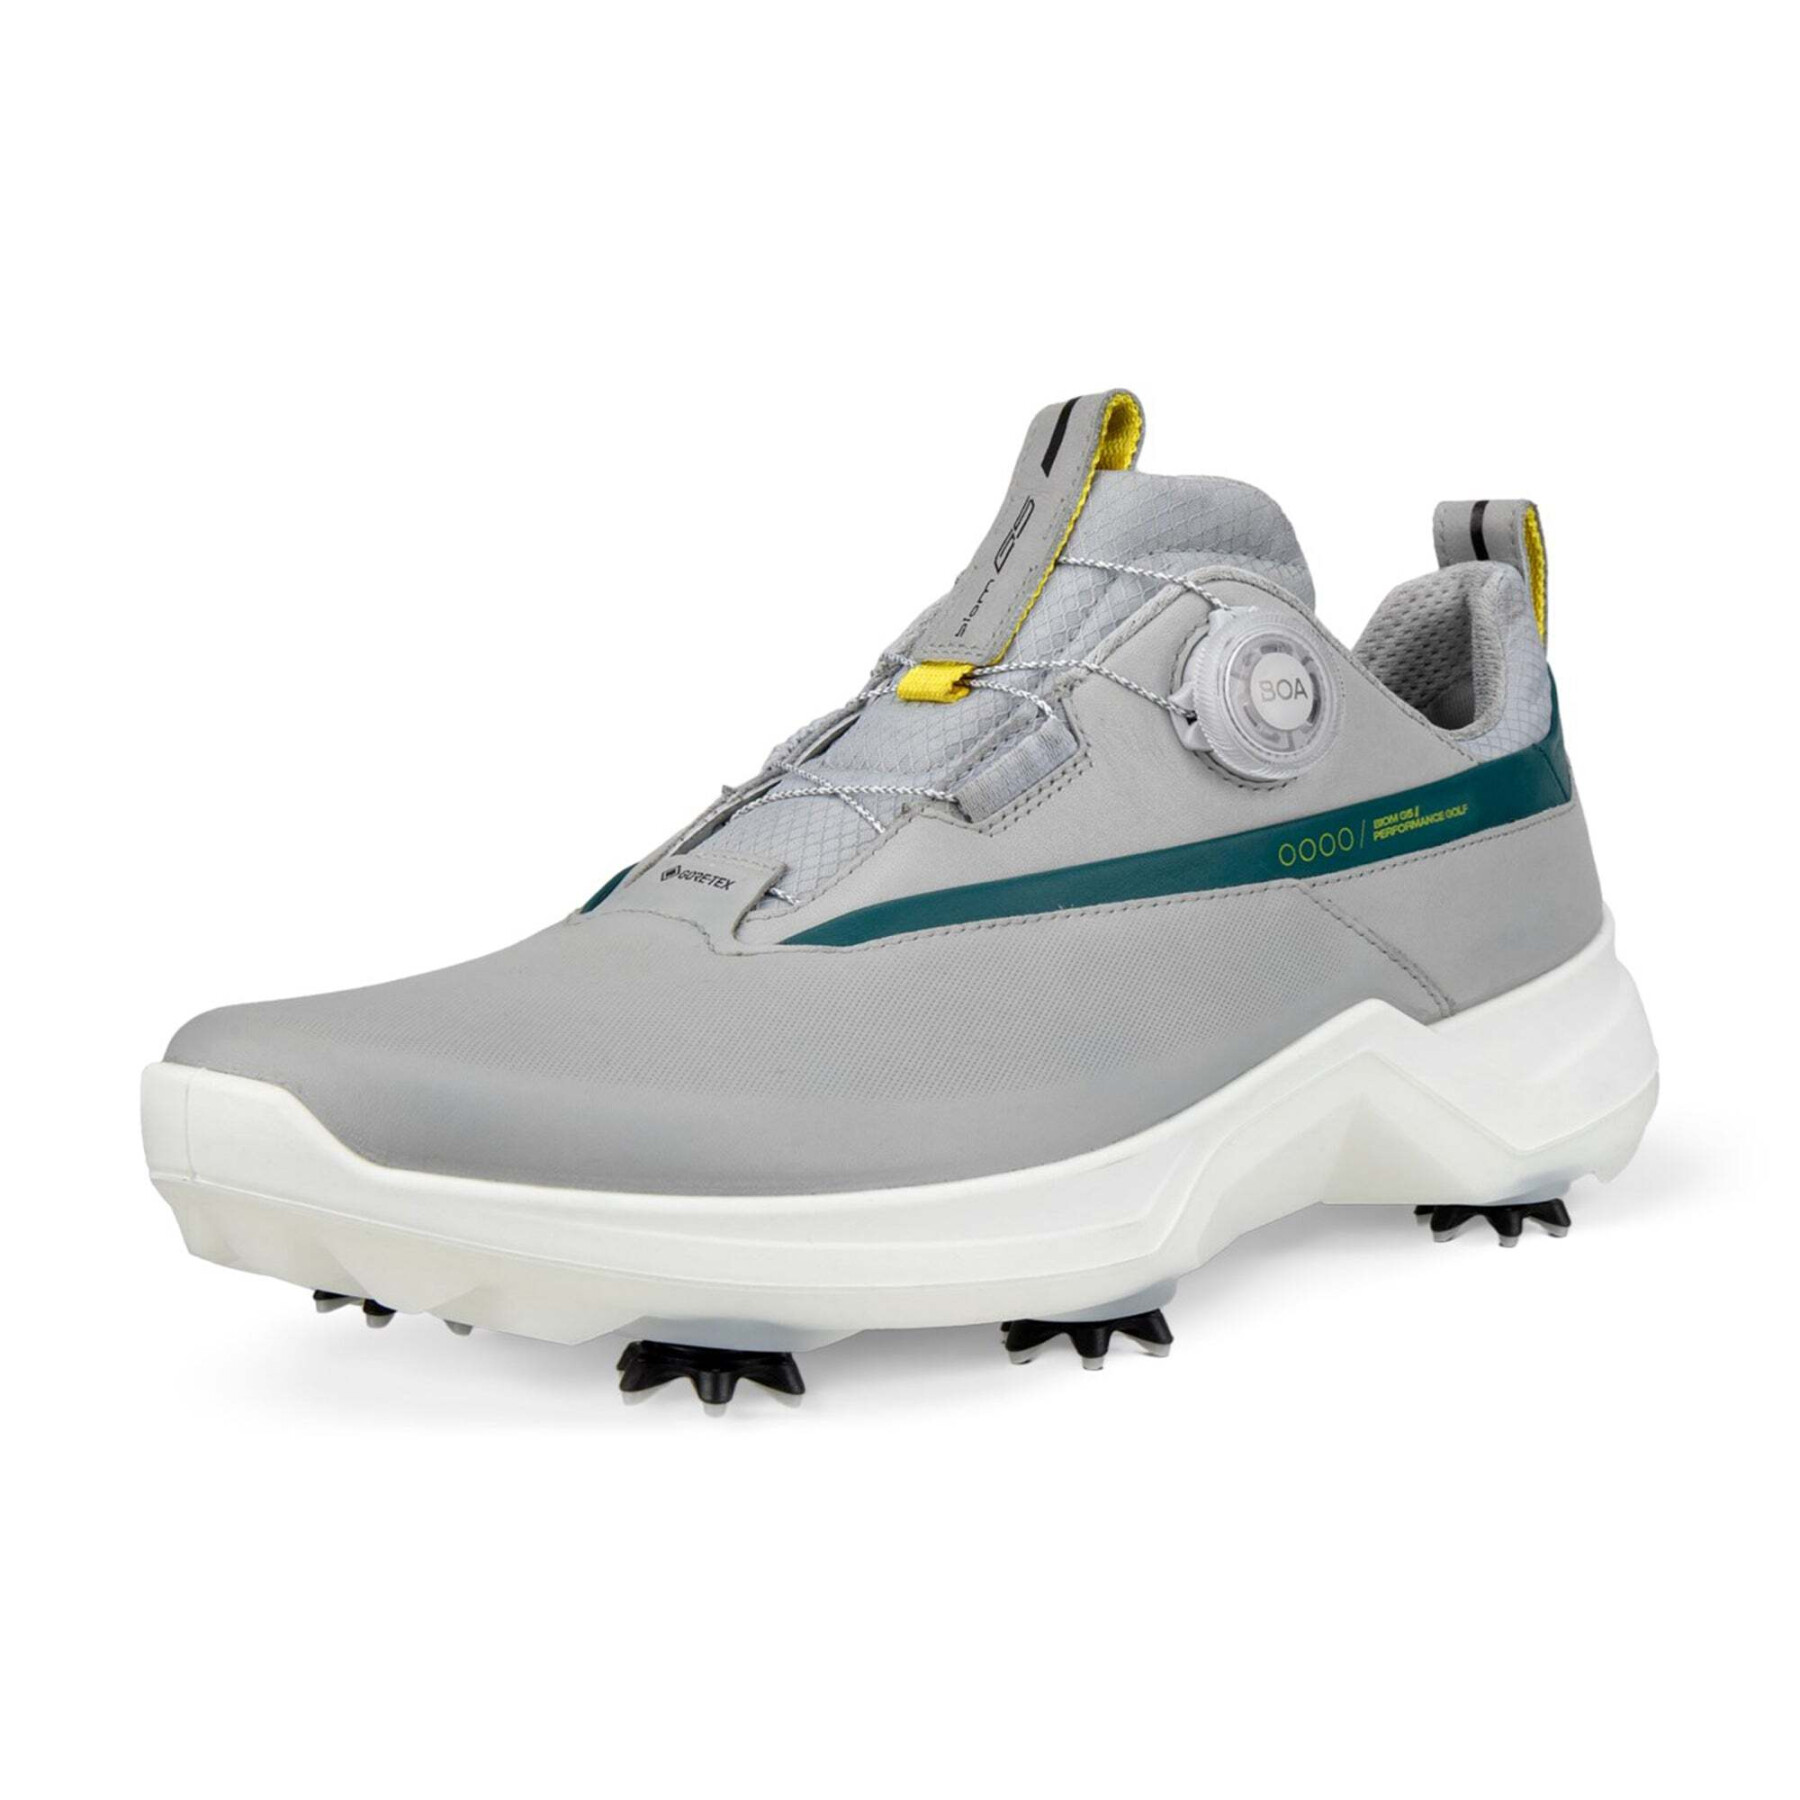 Golf shoes with spikes Ecco Biom G5